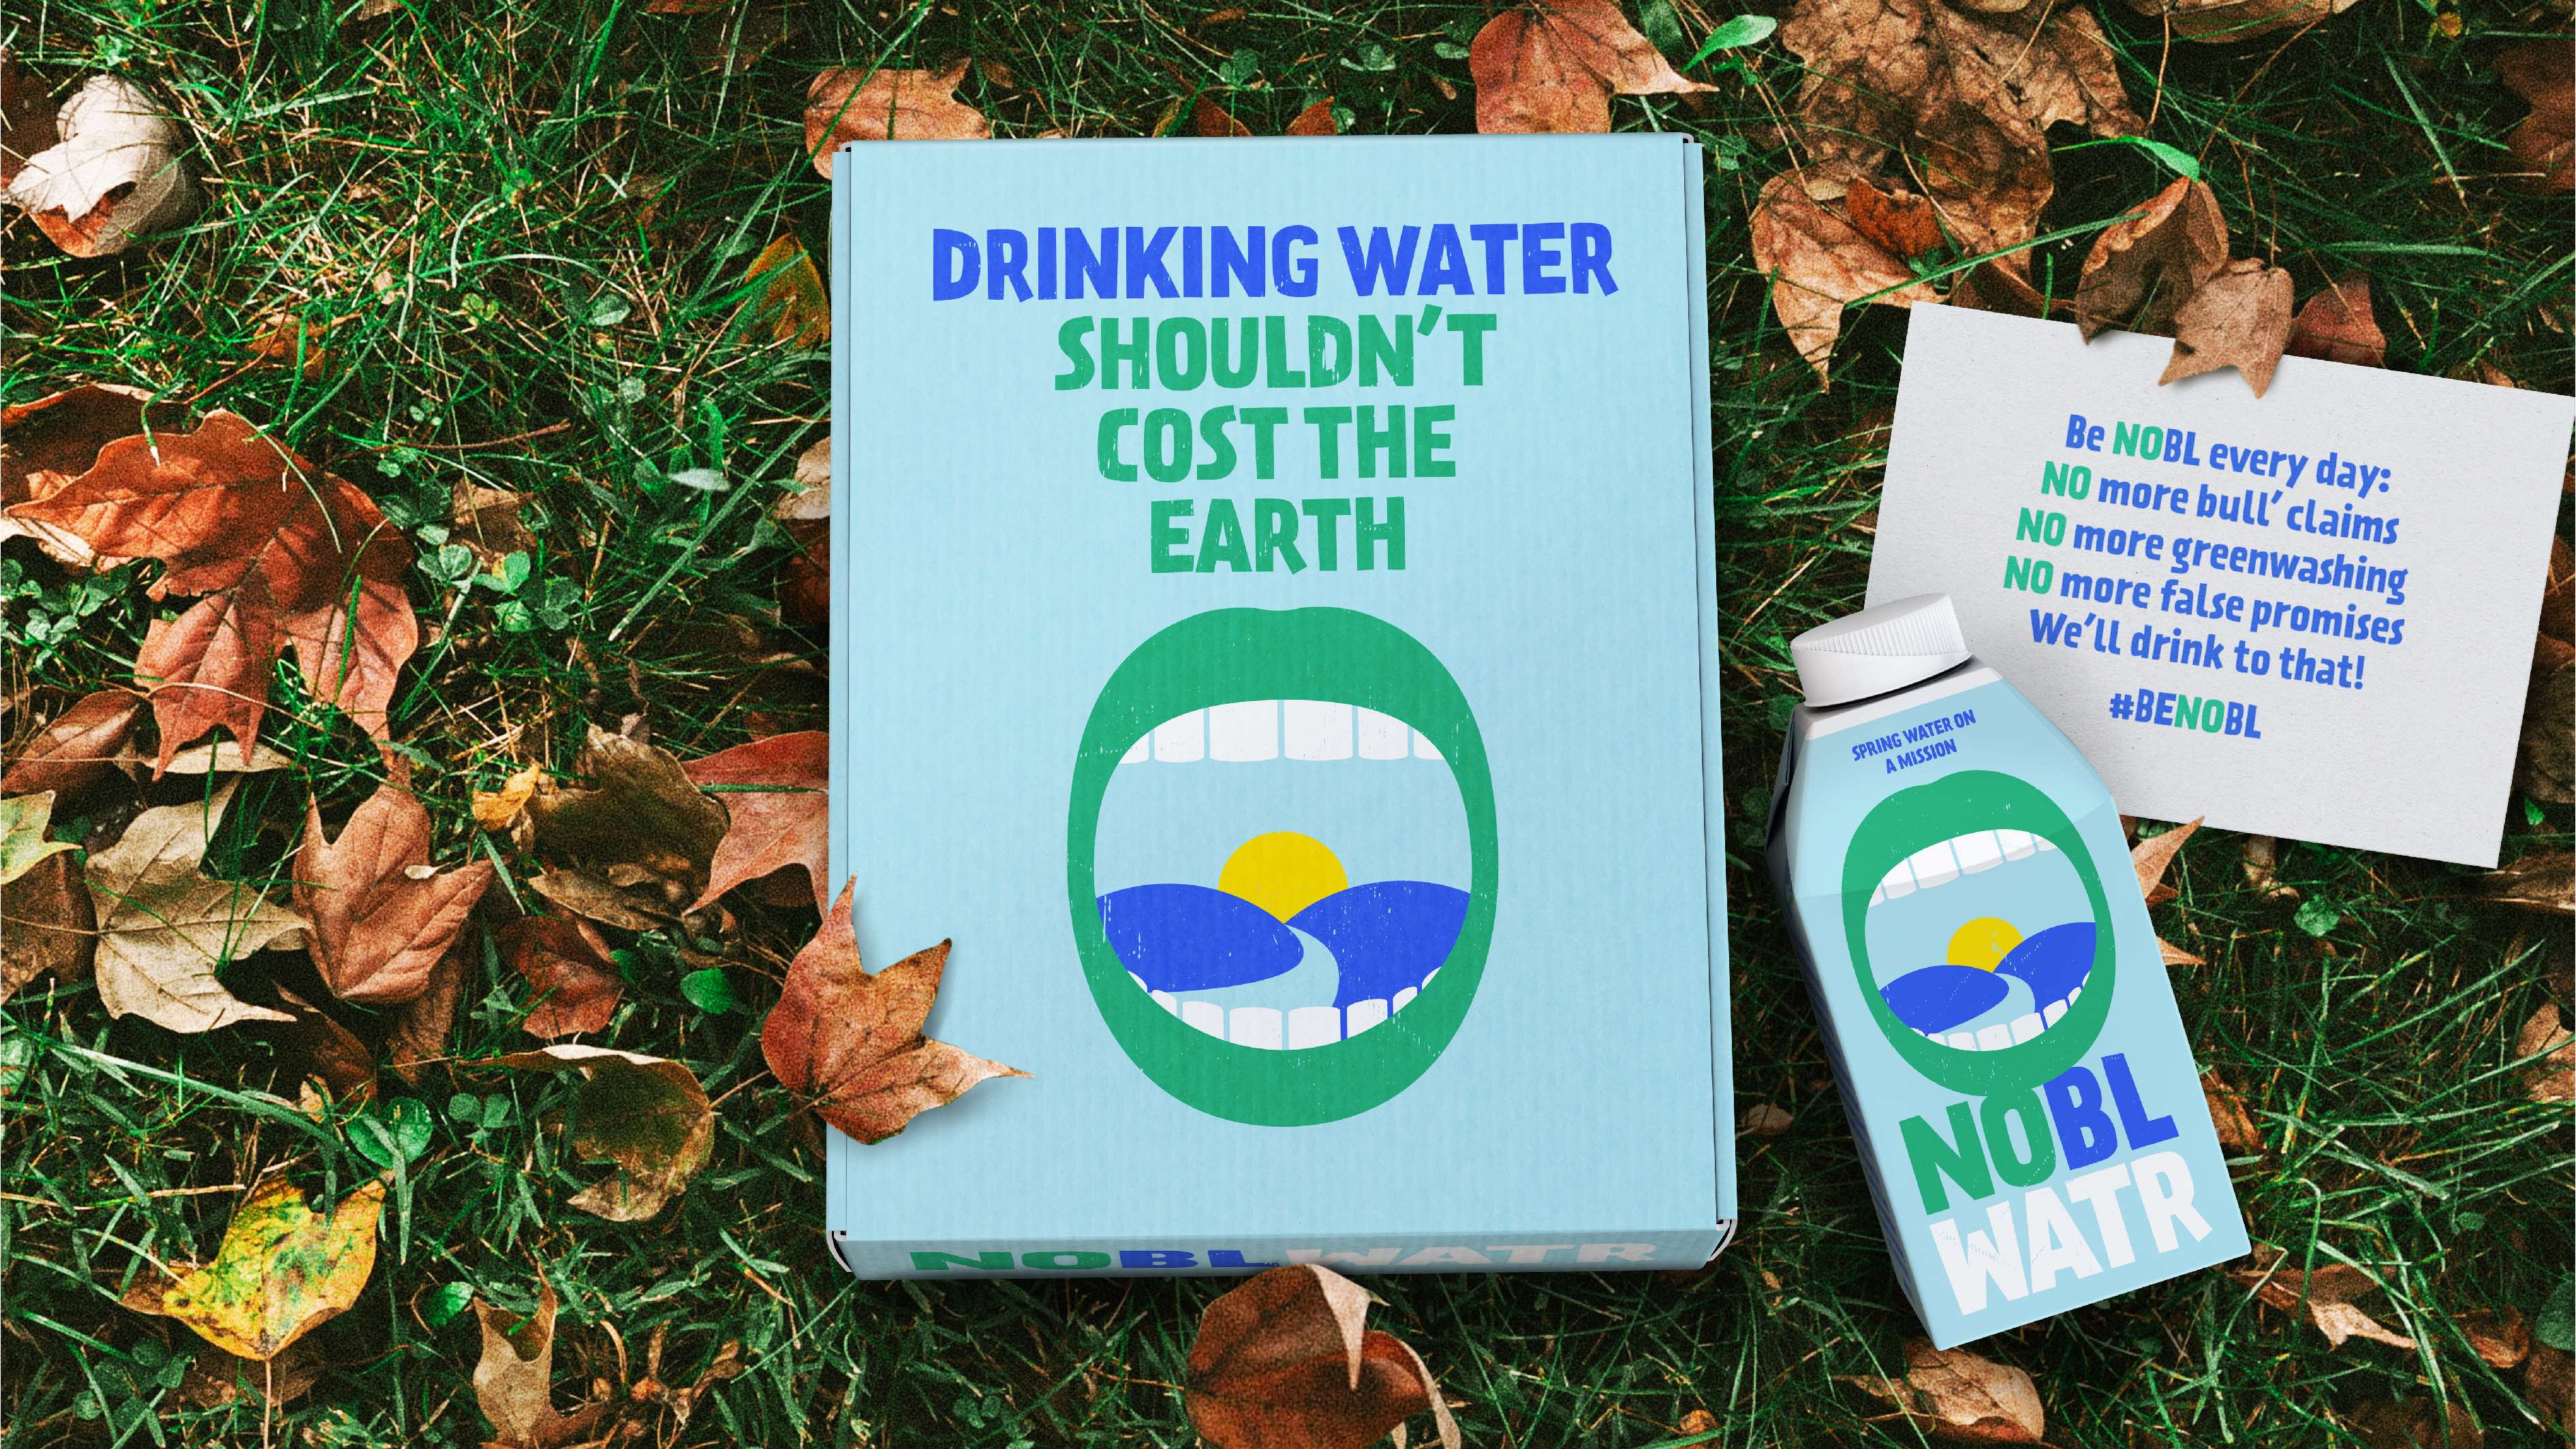 NoBl Watr – Because Drinking Water Shouldn’t Cost Us the Earth